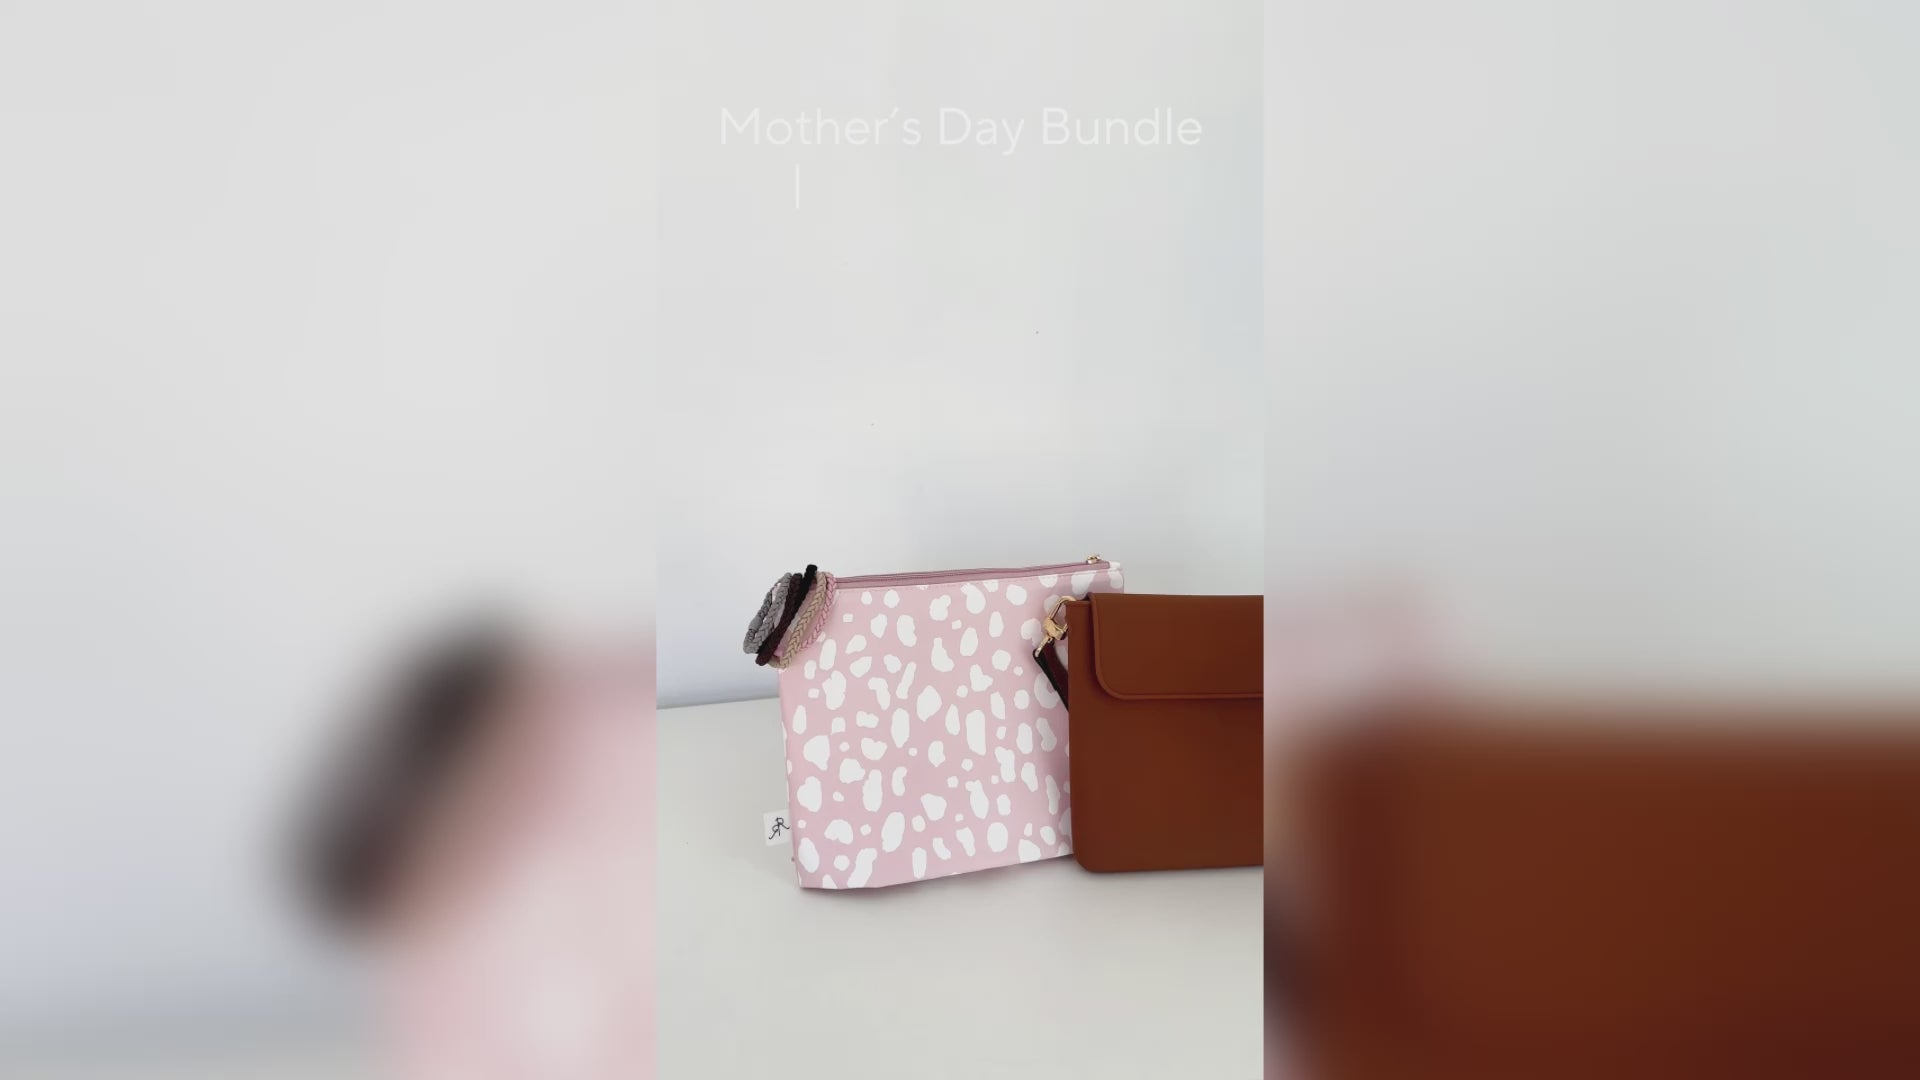 Load video: Mother’s Day Bundle video